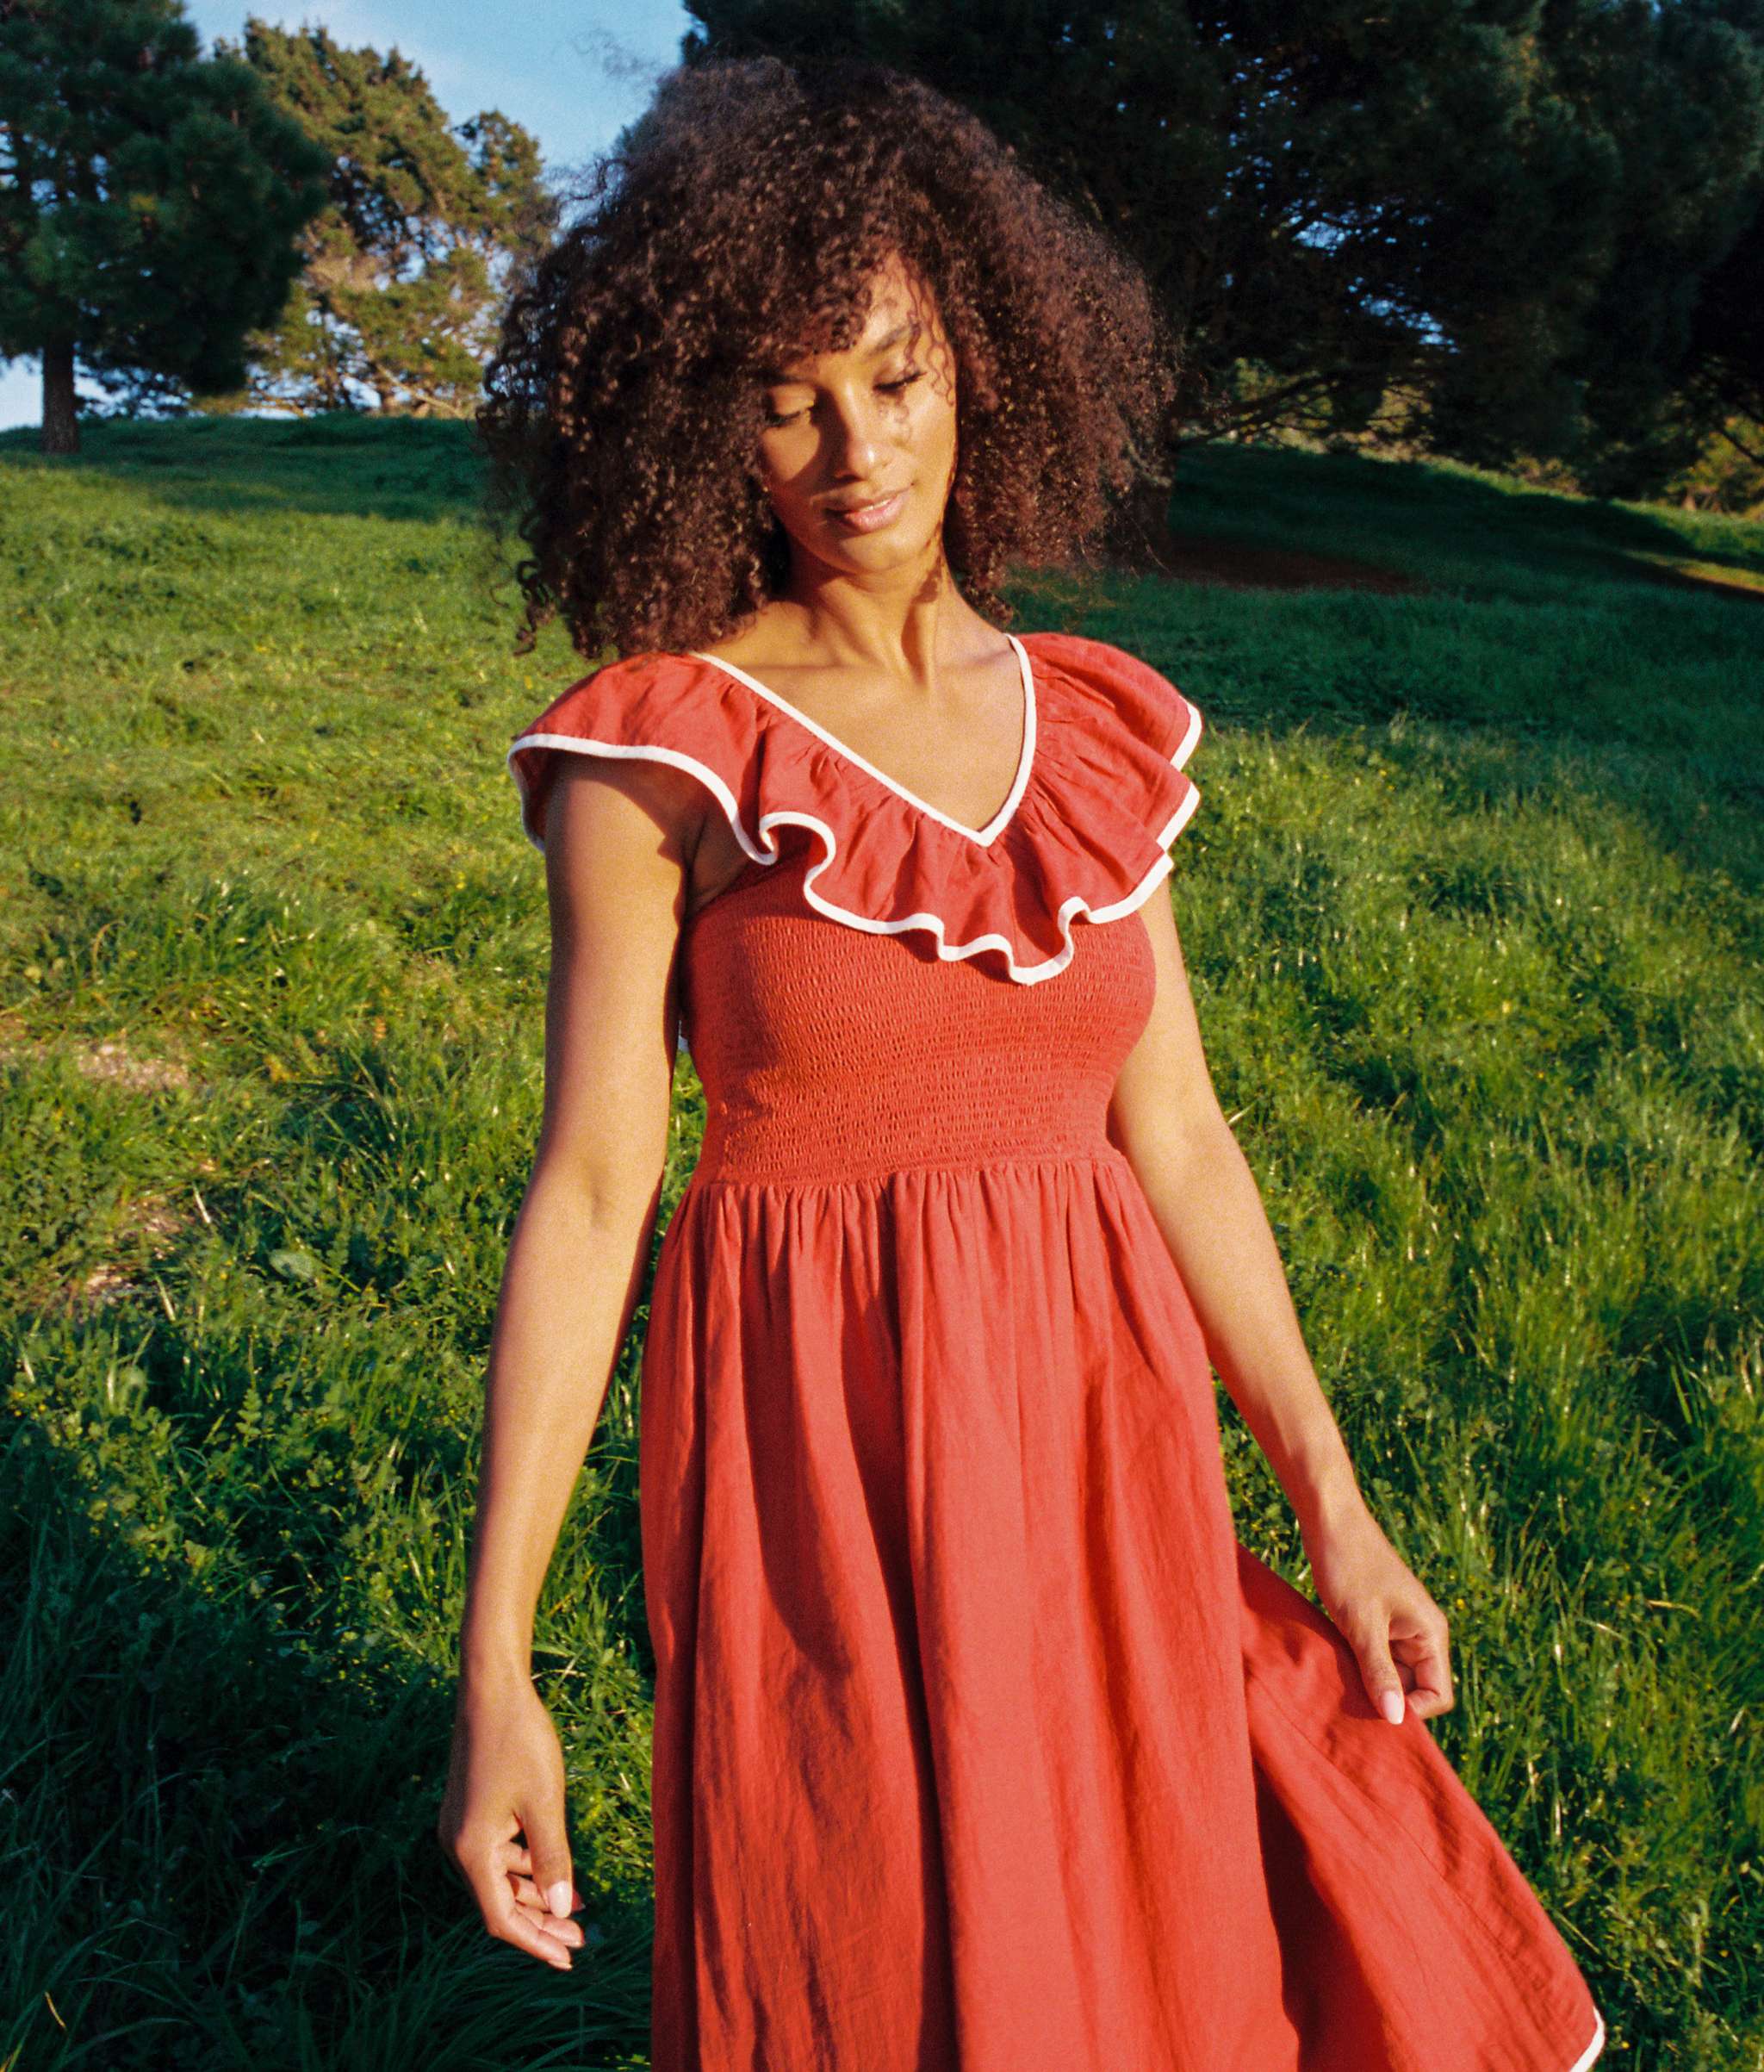 A model in a smocked red dress with ruffled neckline stands in a feel.